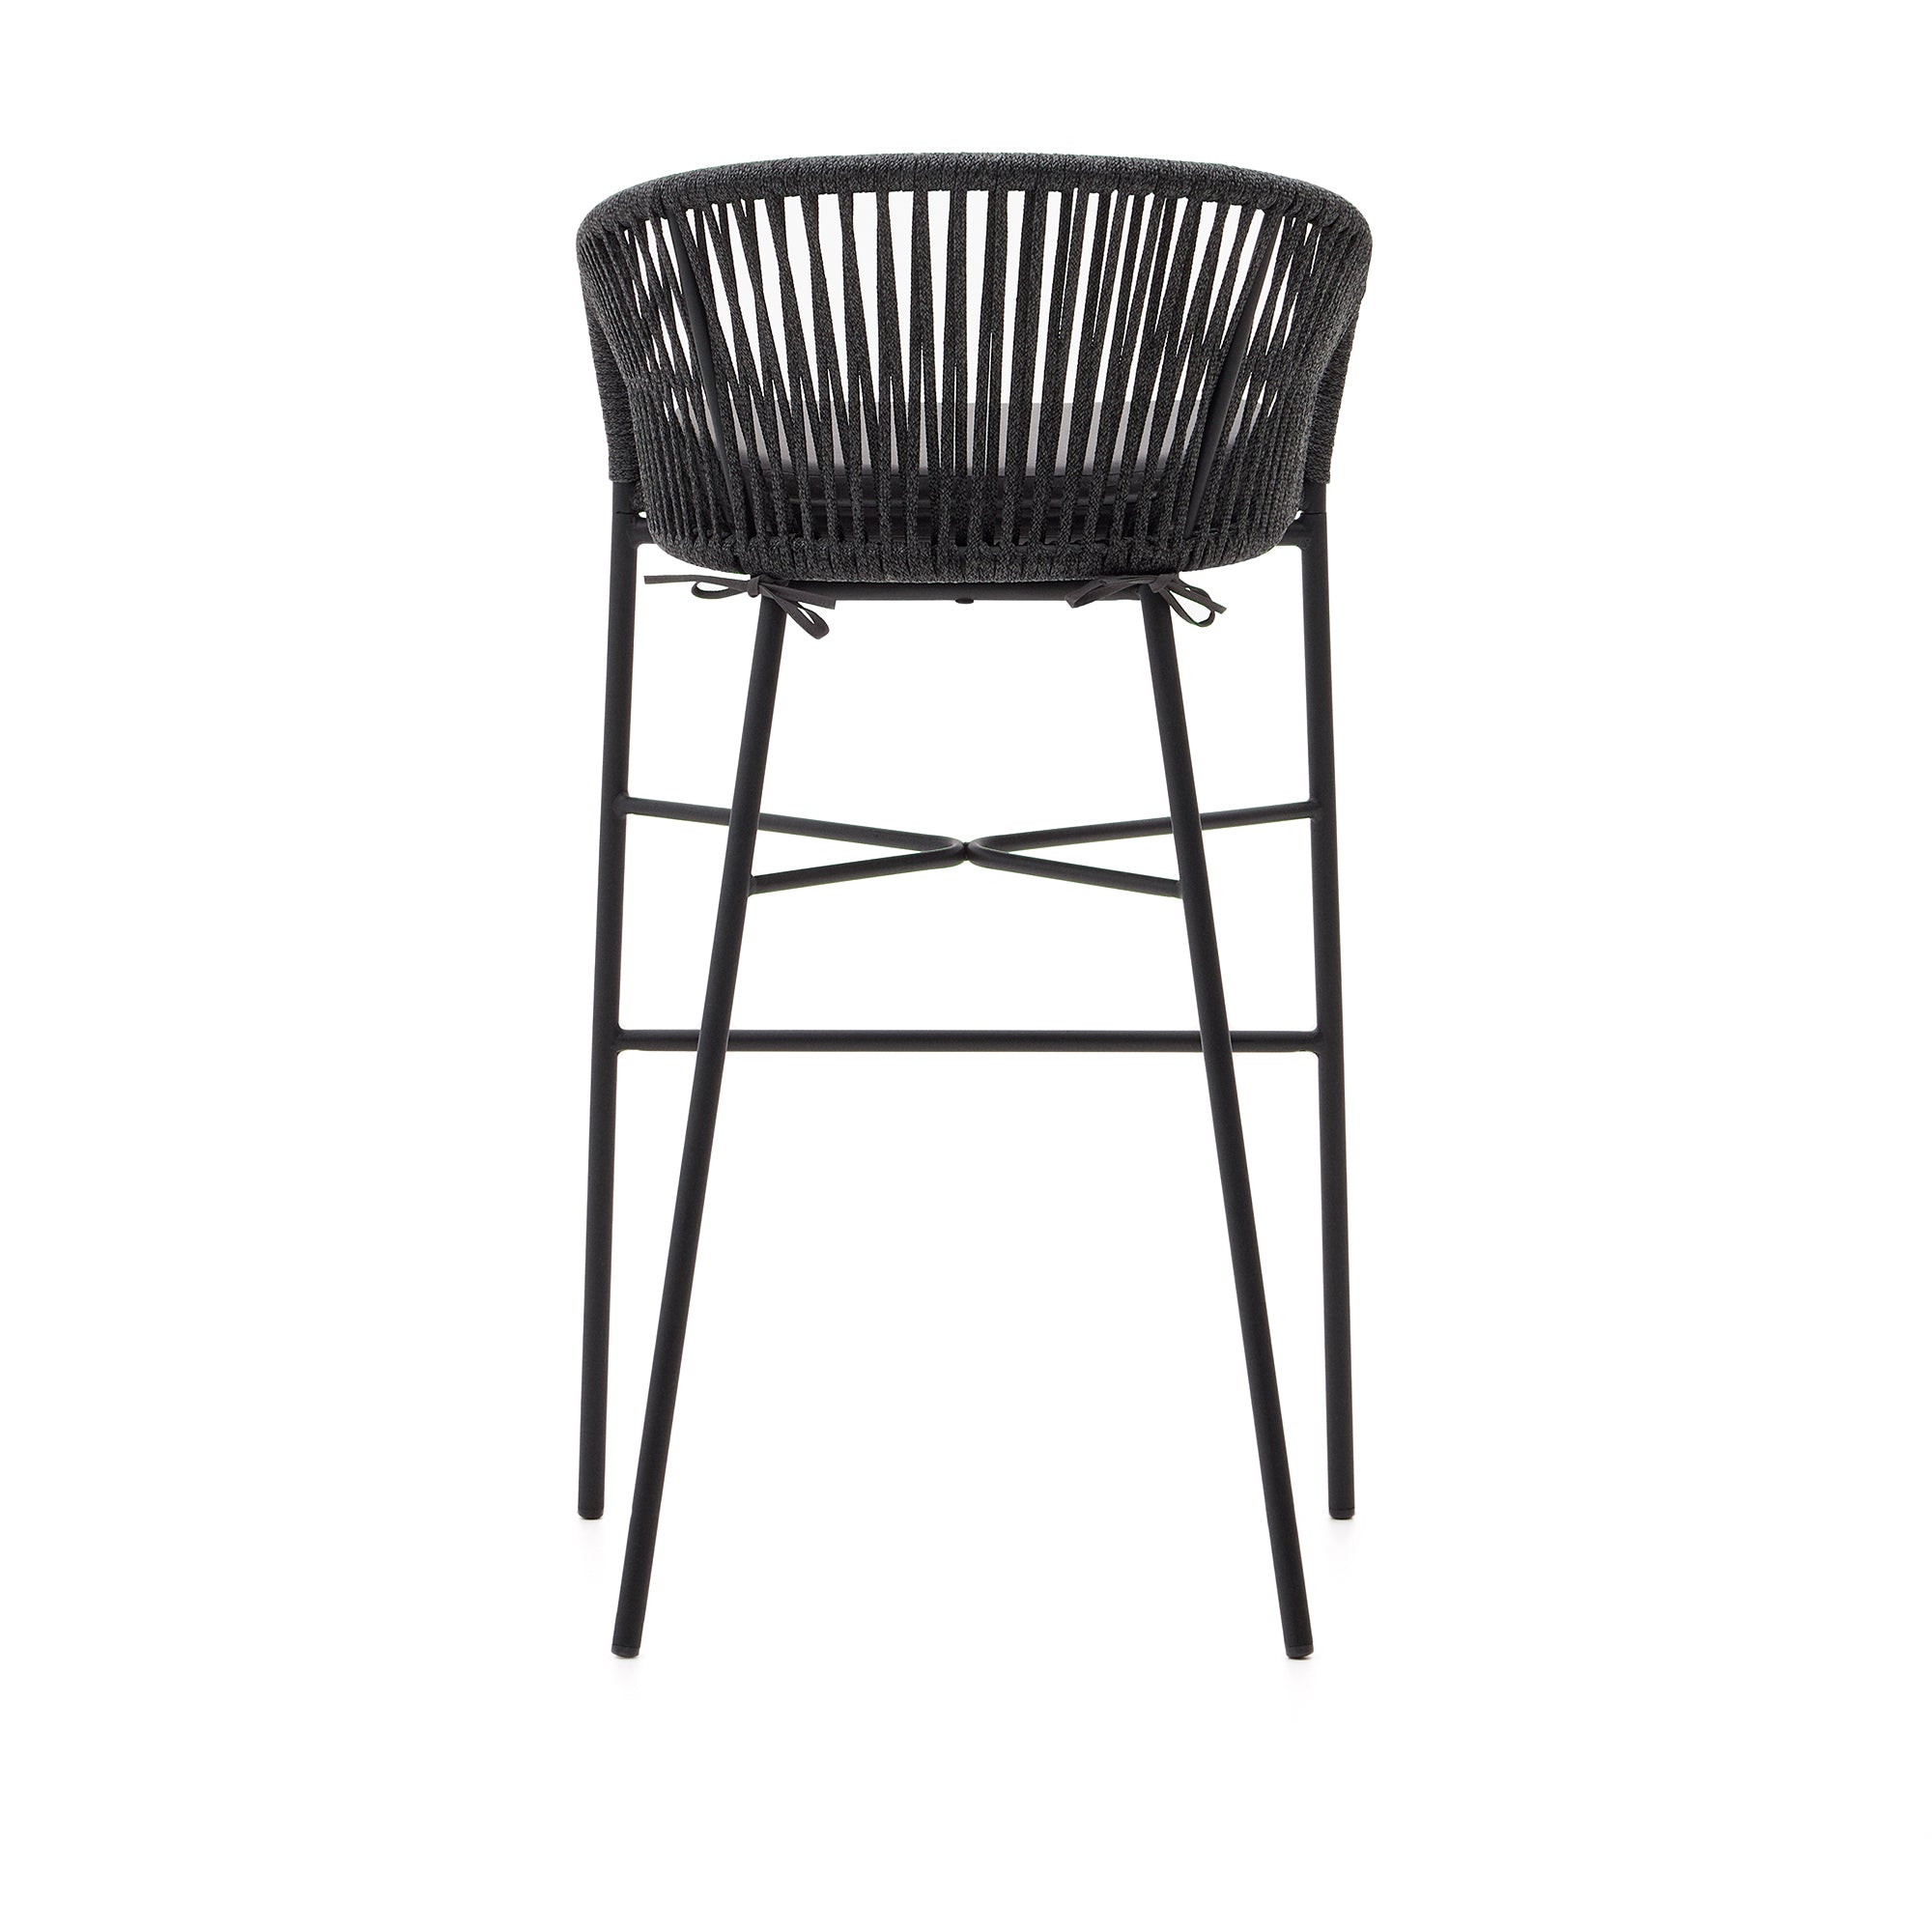 Yanet stackable stool made from black cord and galvanised steel, height 80 cm